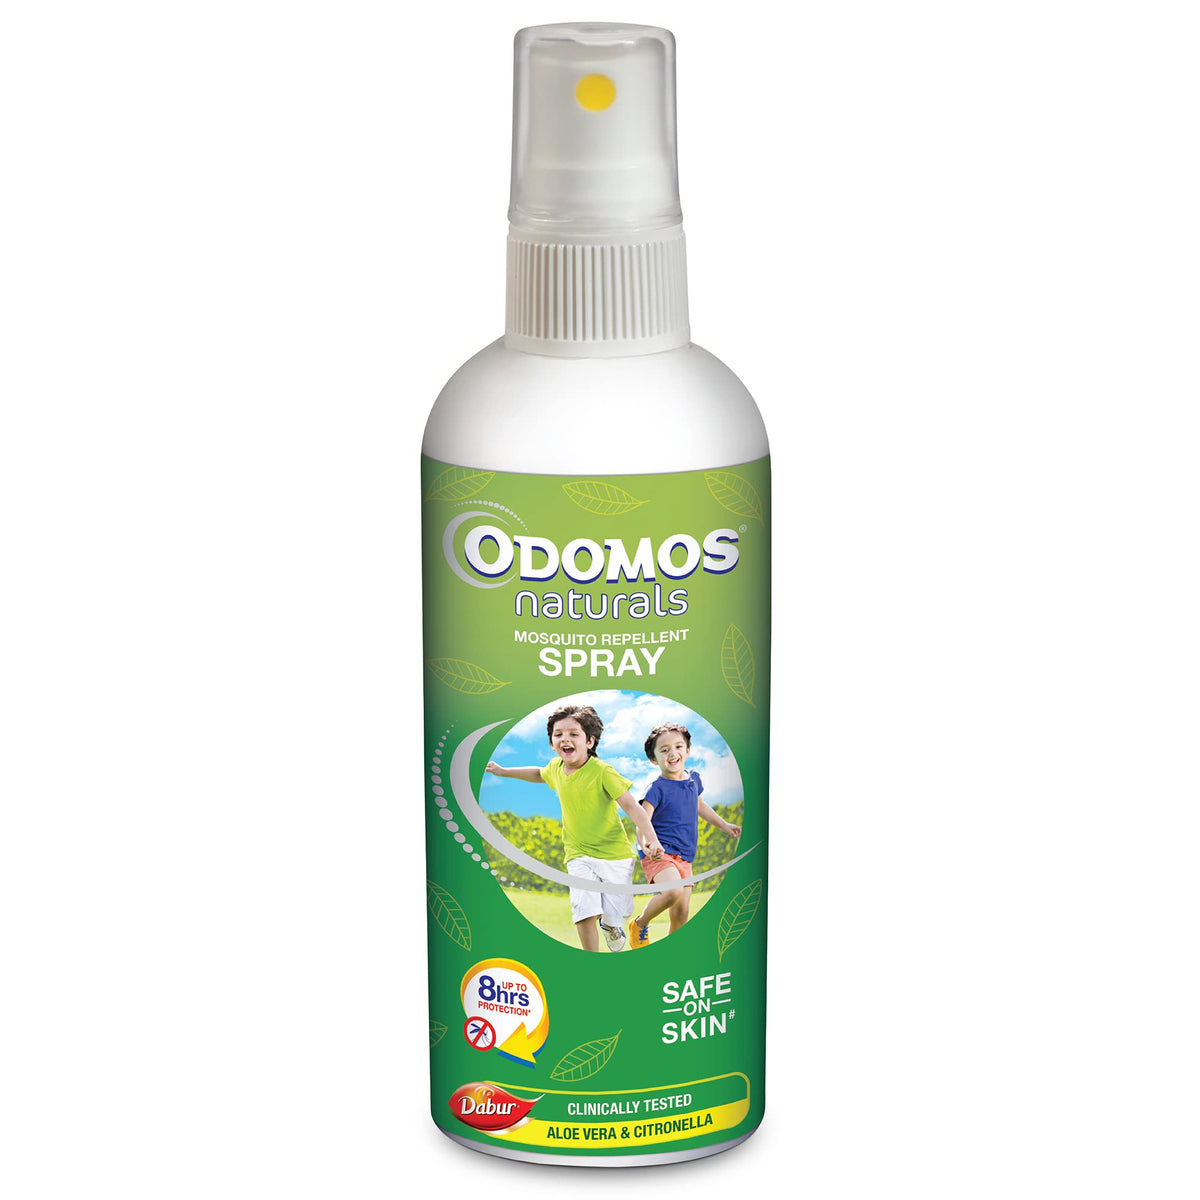 Shop in Sri Lanka for Dabur Odomos Naturals Mosquito Repellant Spray 100ml, Dabur Odomos Naturals Mosquito Repellant Spray 100ml, Clinically Tested & Pediatrician Certified,8 Hours Protection in Single Application,Protection Against Dengue, Malaria & Chikungunya,Safe on Skin - Mosquito Repellent from Odomos - Shop at Selekt